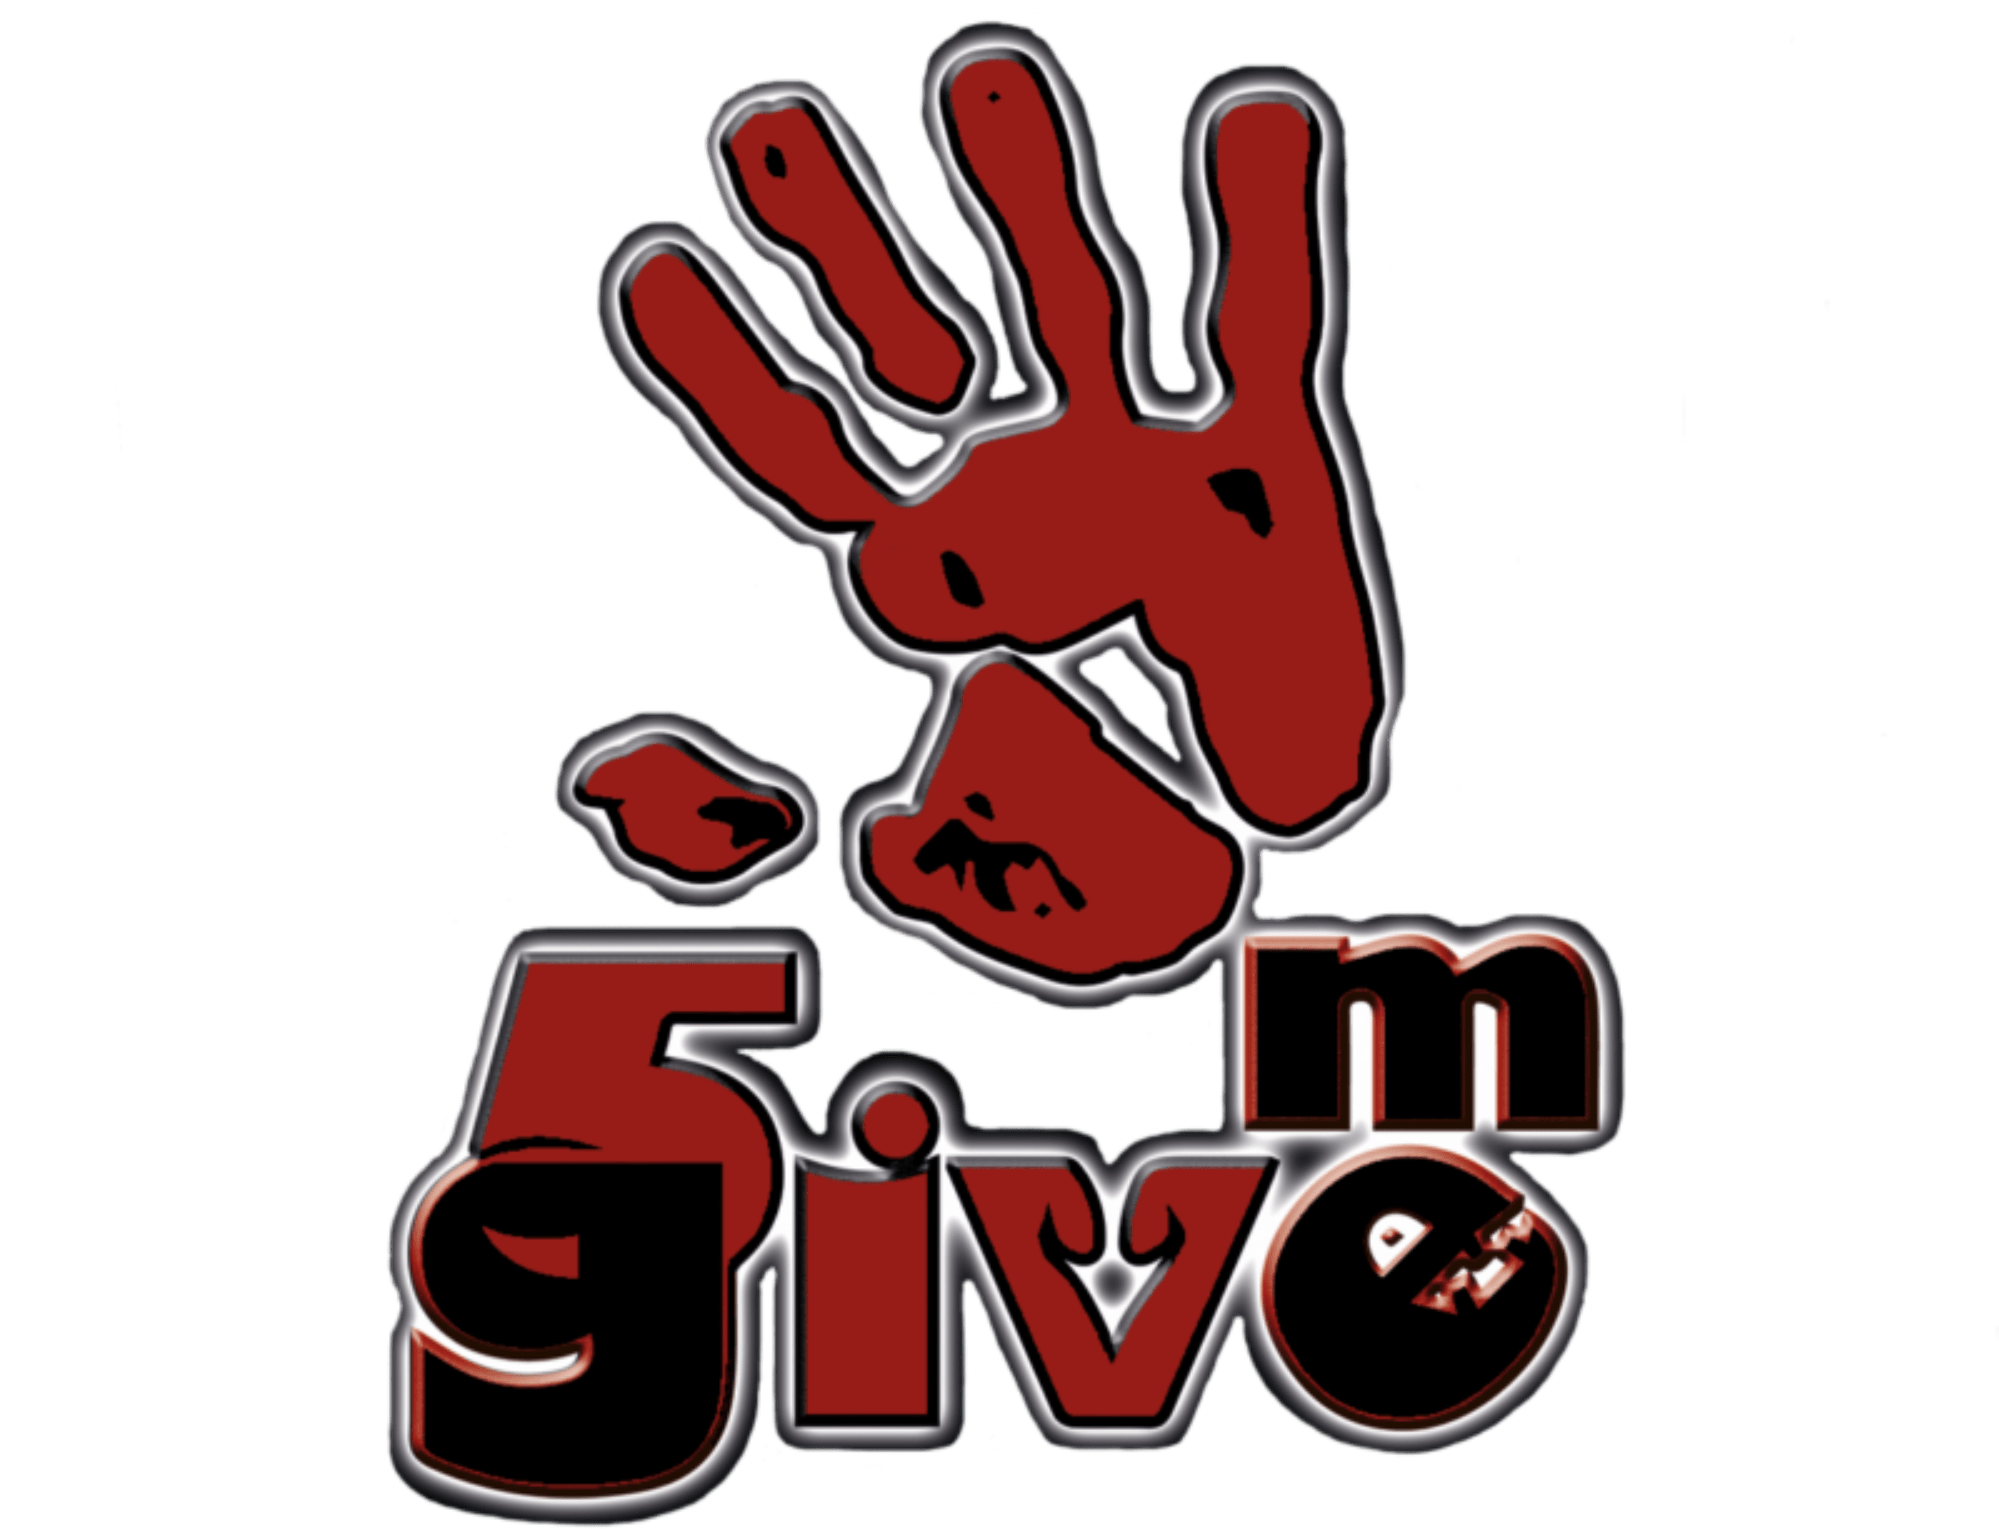 Give-me-5ive